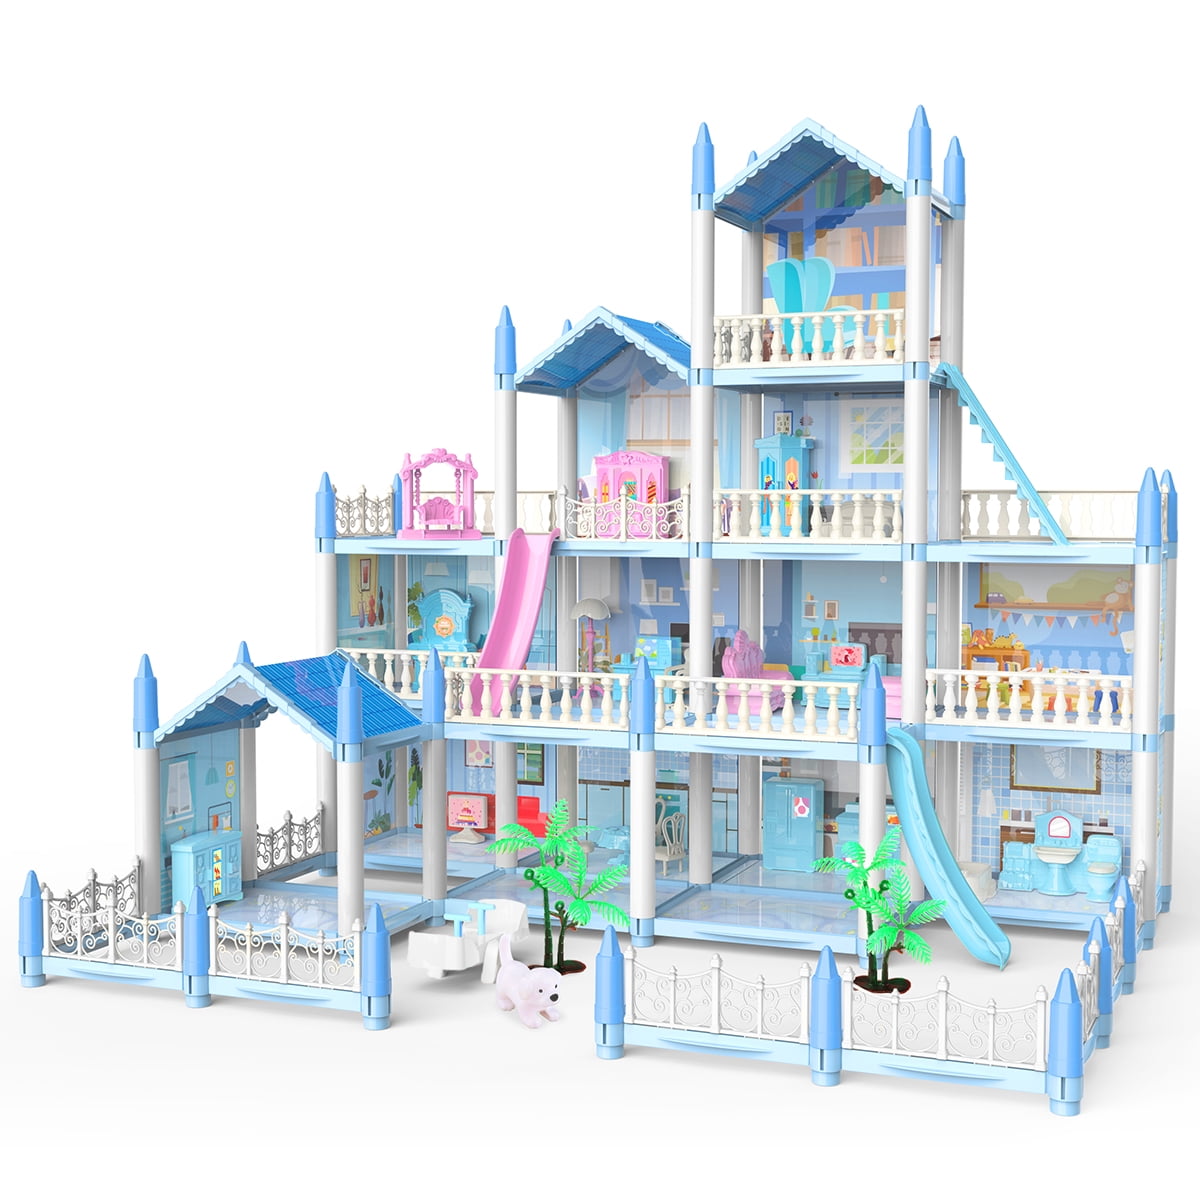 GPED Doll Dream House Playset with 100+ Furniture & Accessories, 4 Stories, 14 Rooms and more